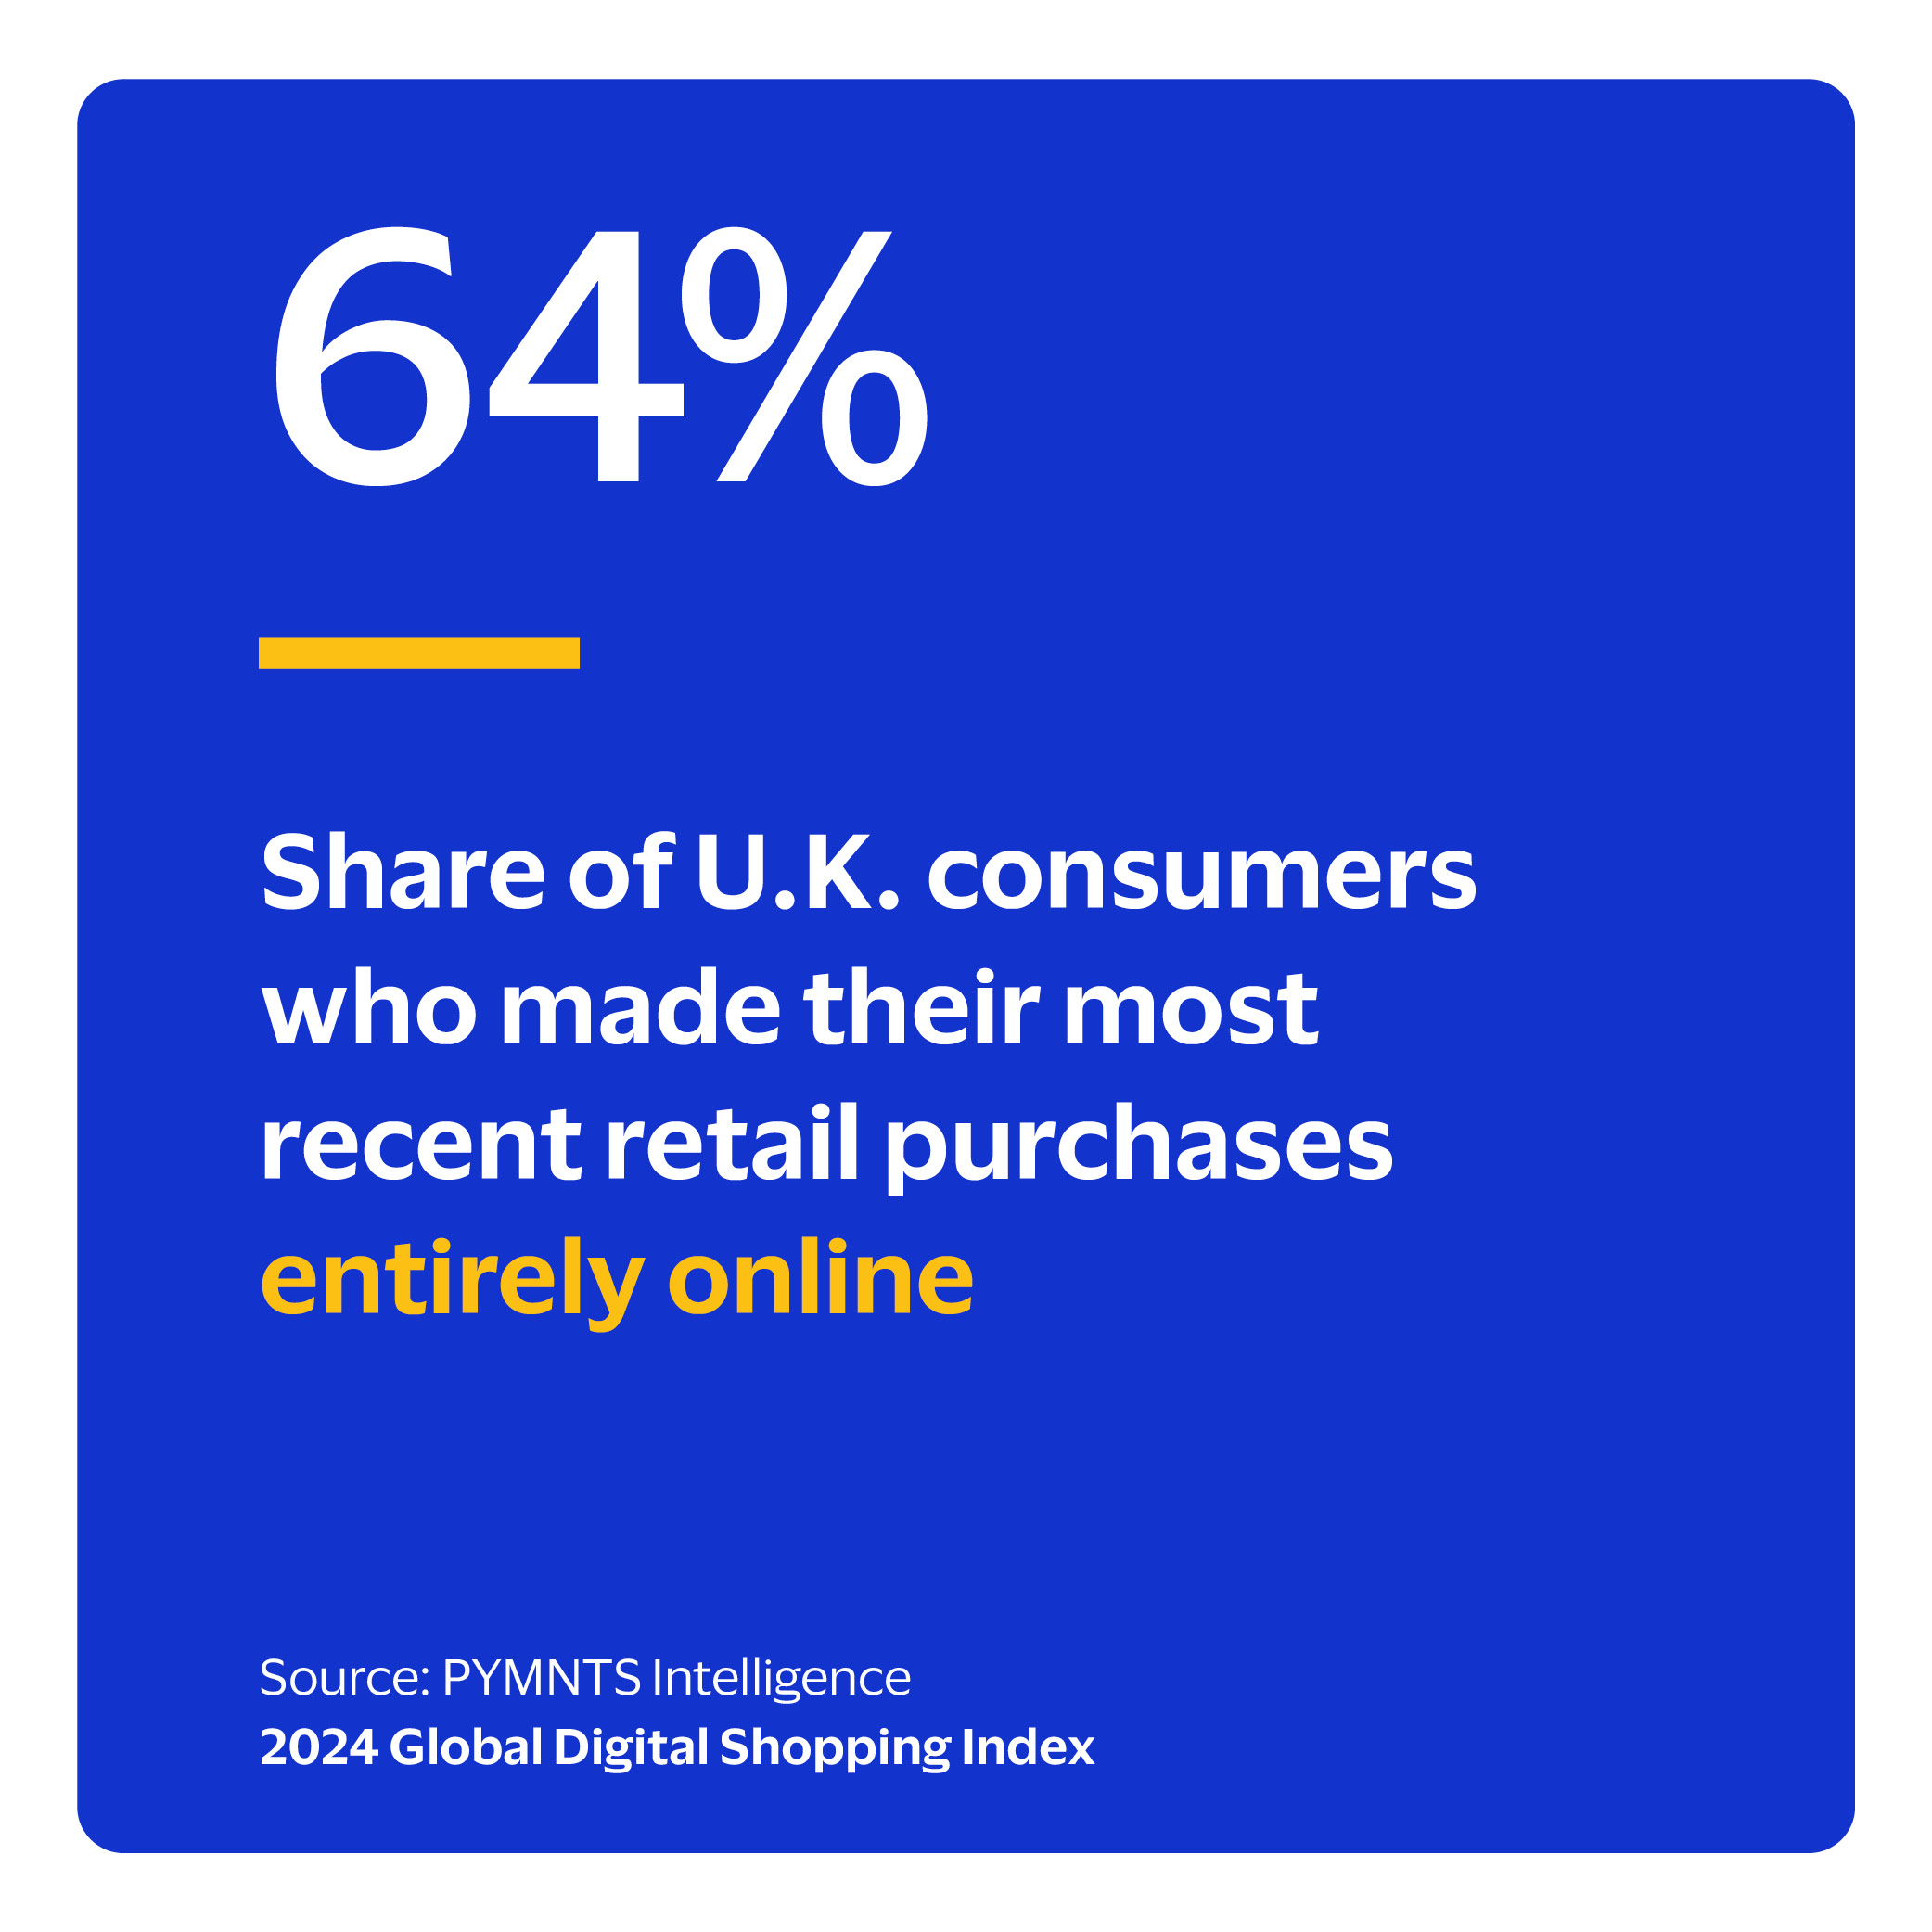  Share of U.K. remote shoppers who made their most recent retail purchase entirely online